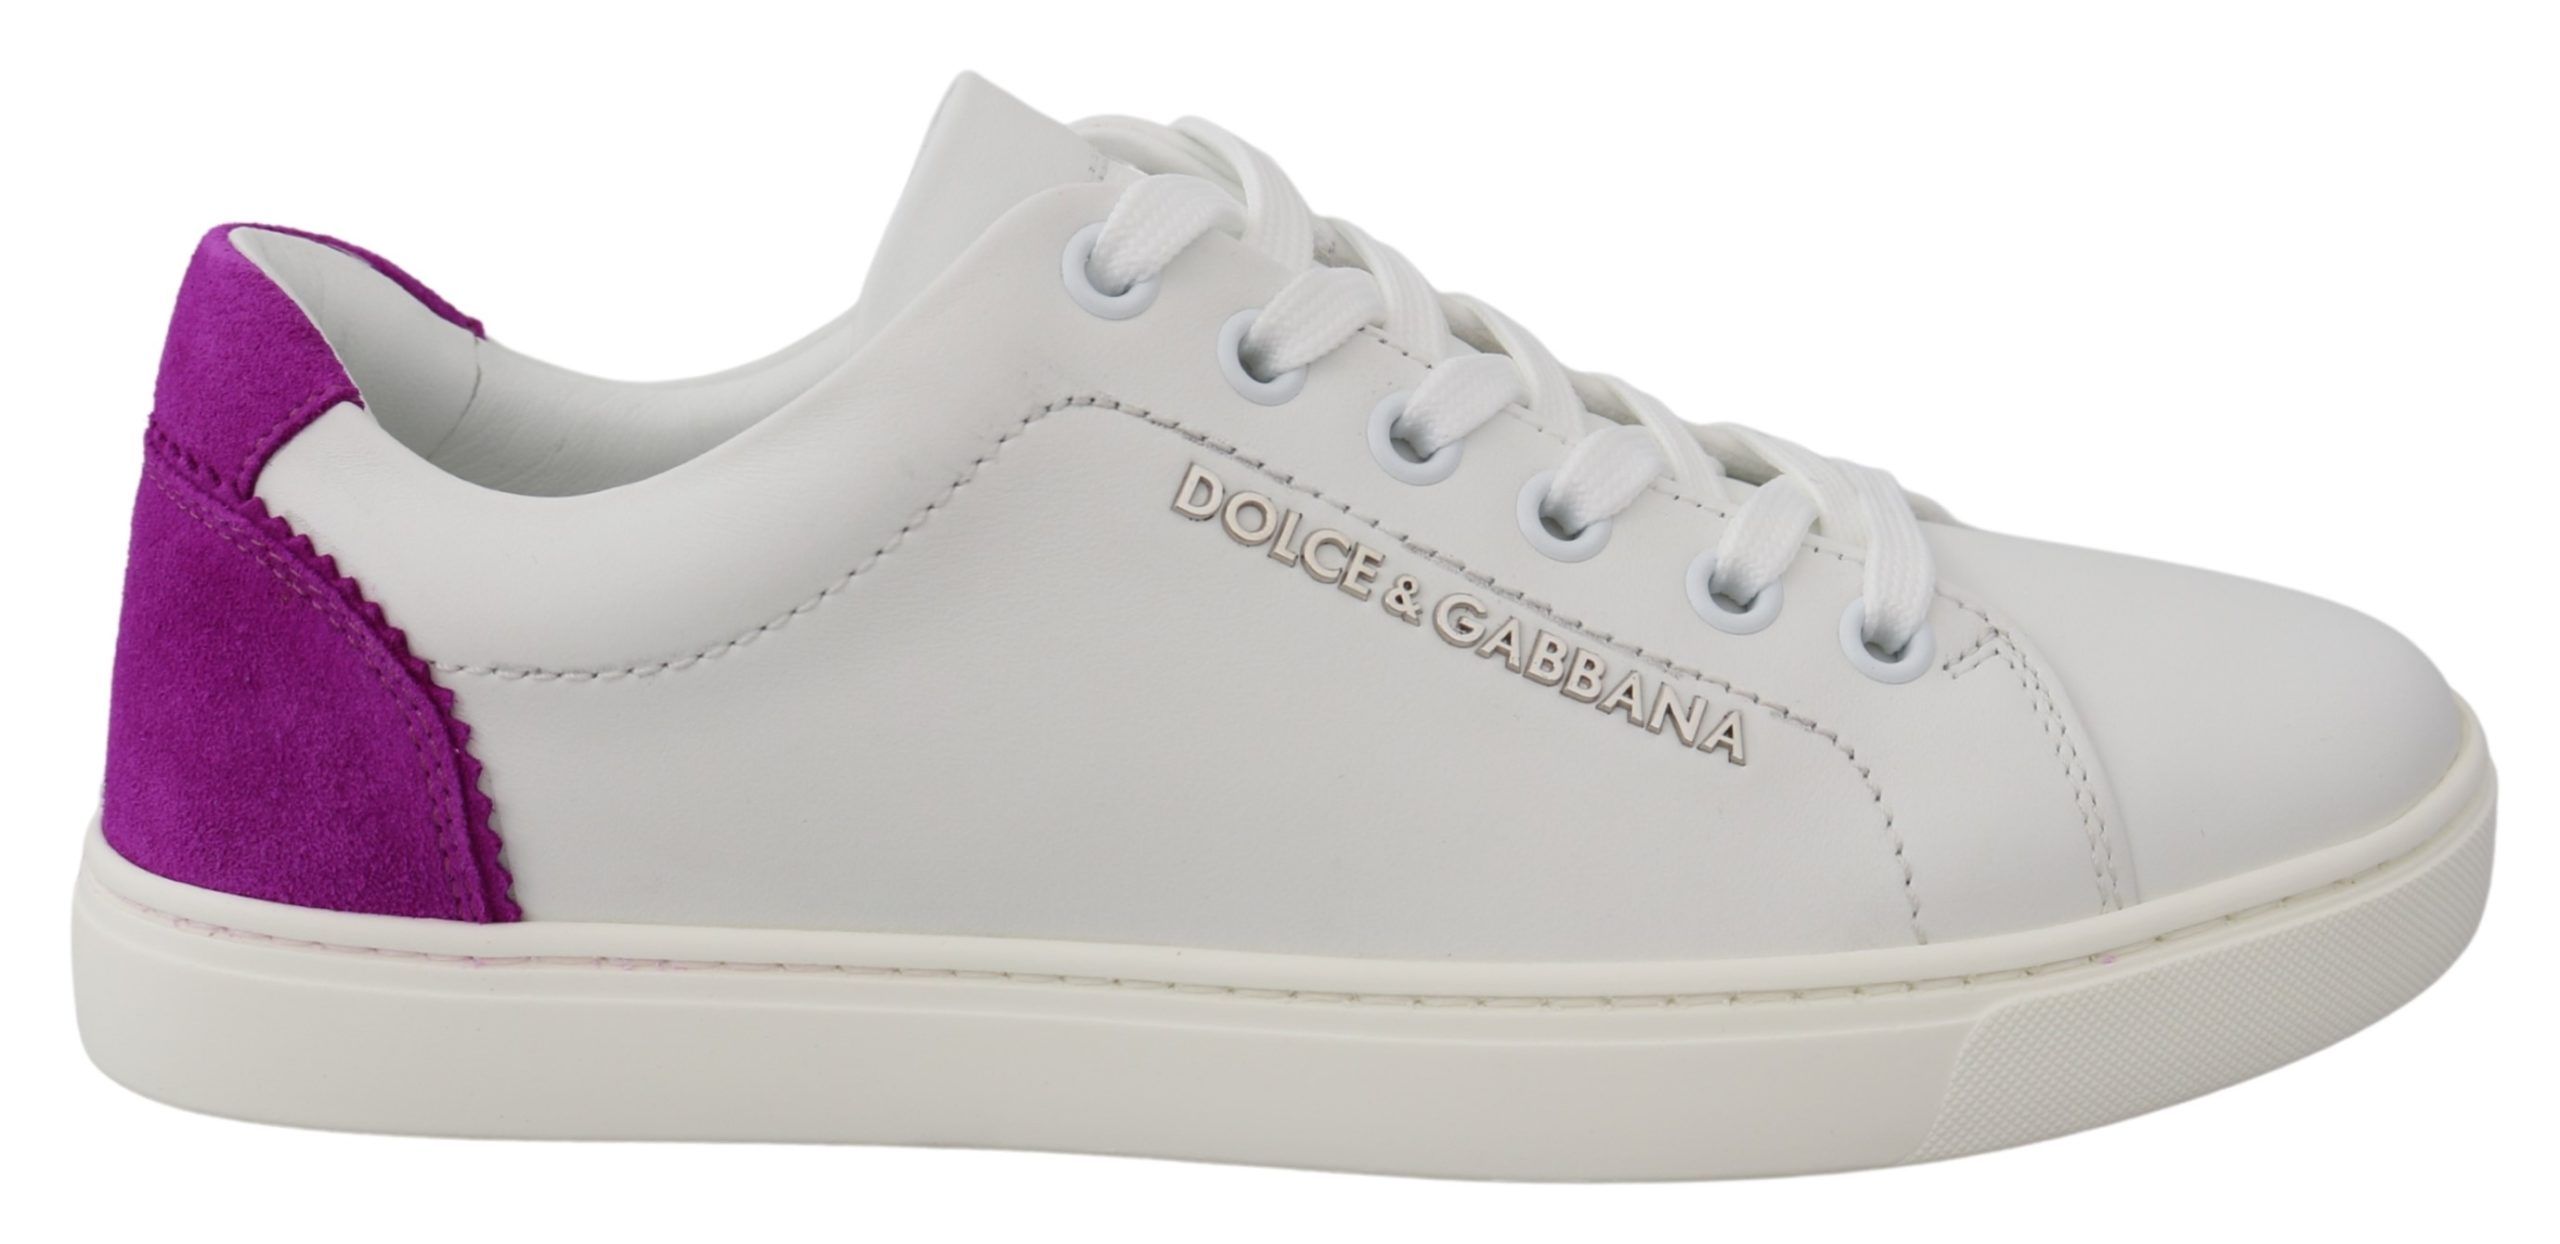 White Dolce & Gabbana Chic White Leather Sneakers with Purple Accents EU35.5/US5.5